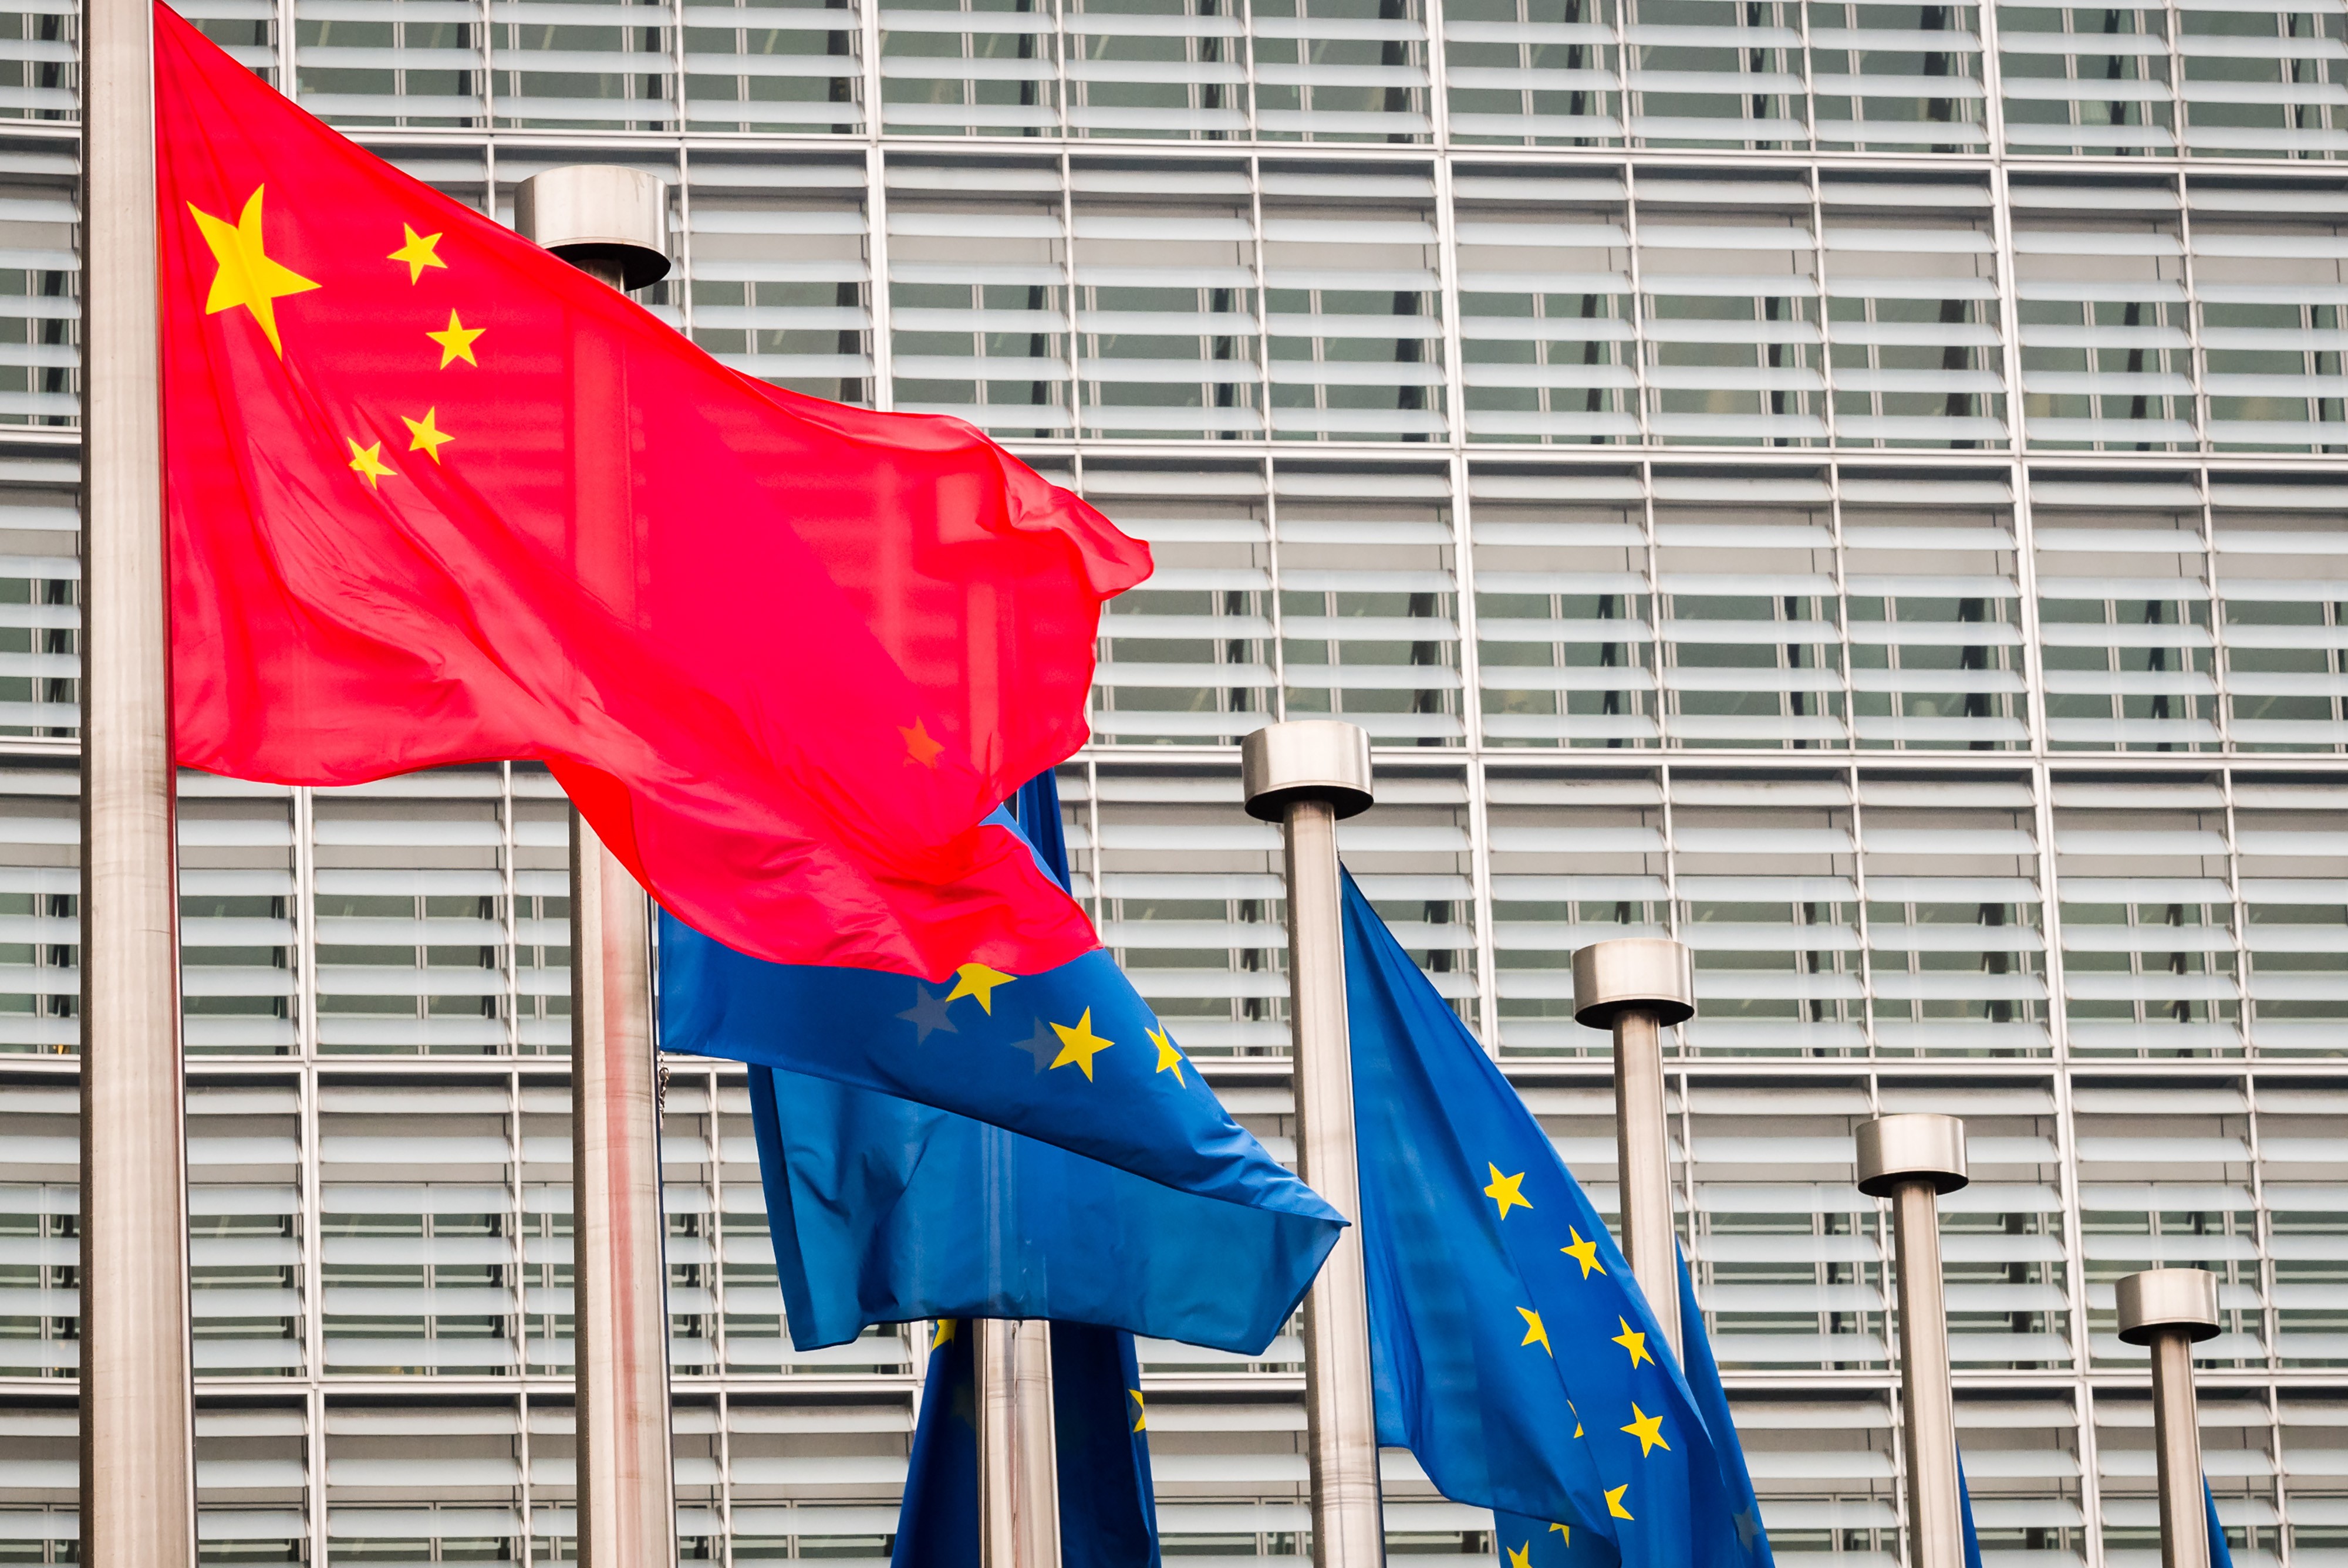 The Chinese leadership had dubbed 2020 the “year of Europe”, but its diplomatic agenda has been hit by the coronavirus pandemic. Photo: Bloomberg